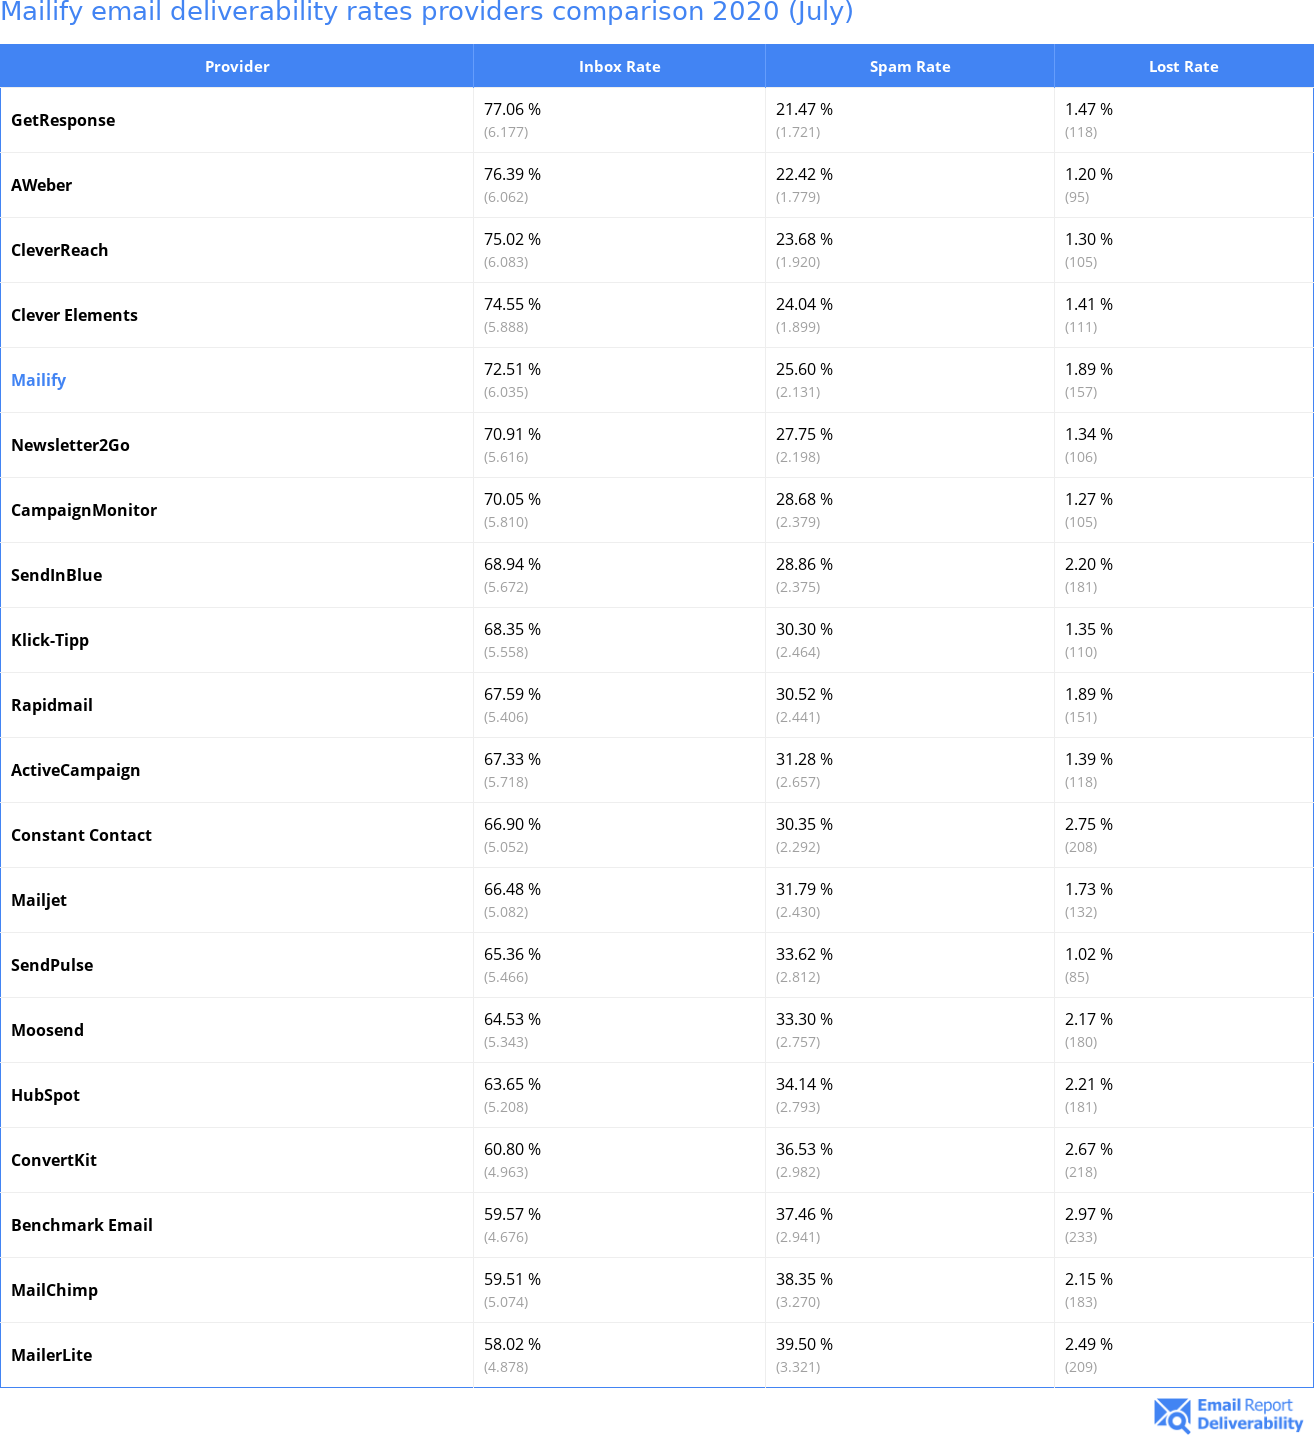 Mailify email deliverability rates providers comparison 2020 (July)